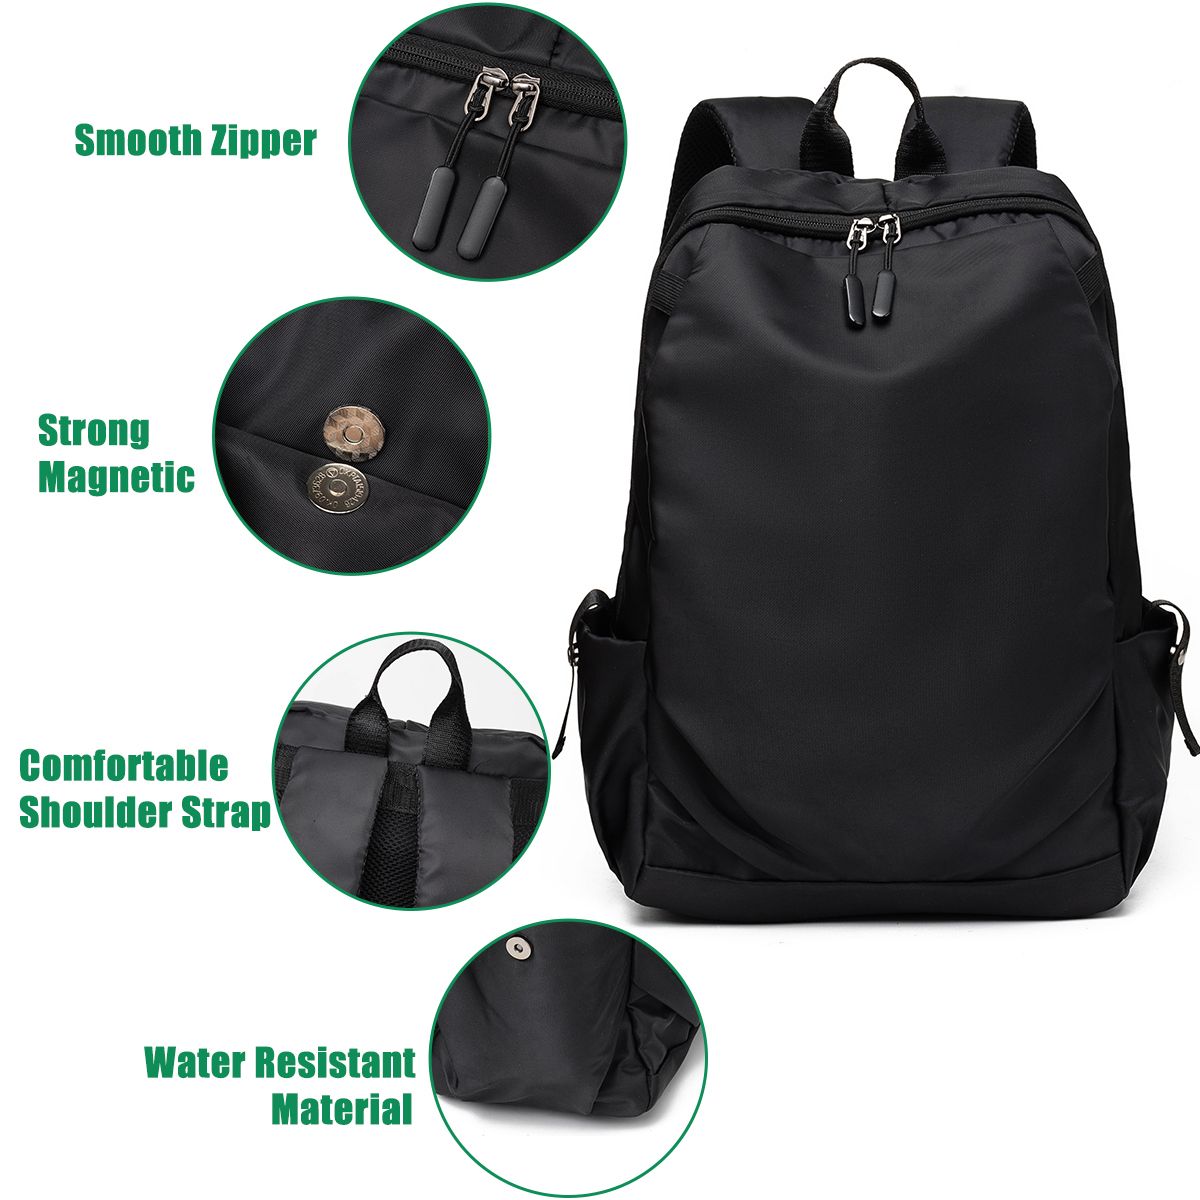 OURBAG-Casual-Simple-Outdoor-Sports-Travel-Backpack-USB-Charging-Laptop-Bag-Student-School-Bag-for-1-1578452